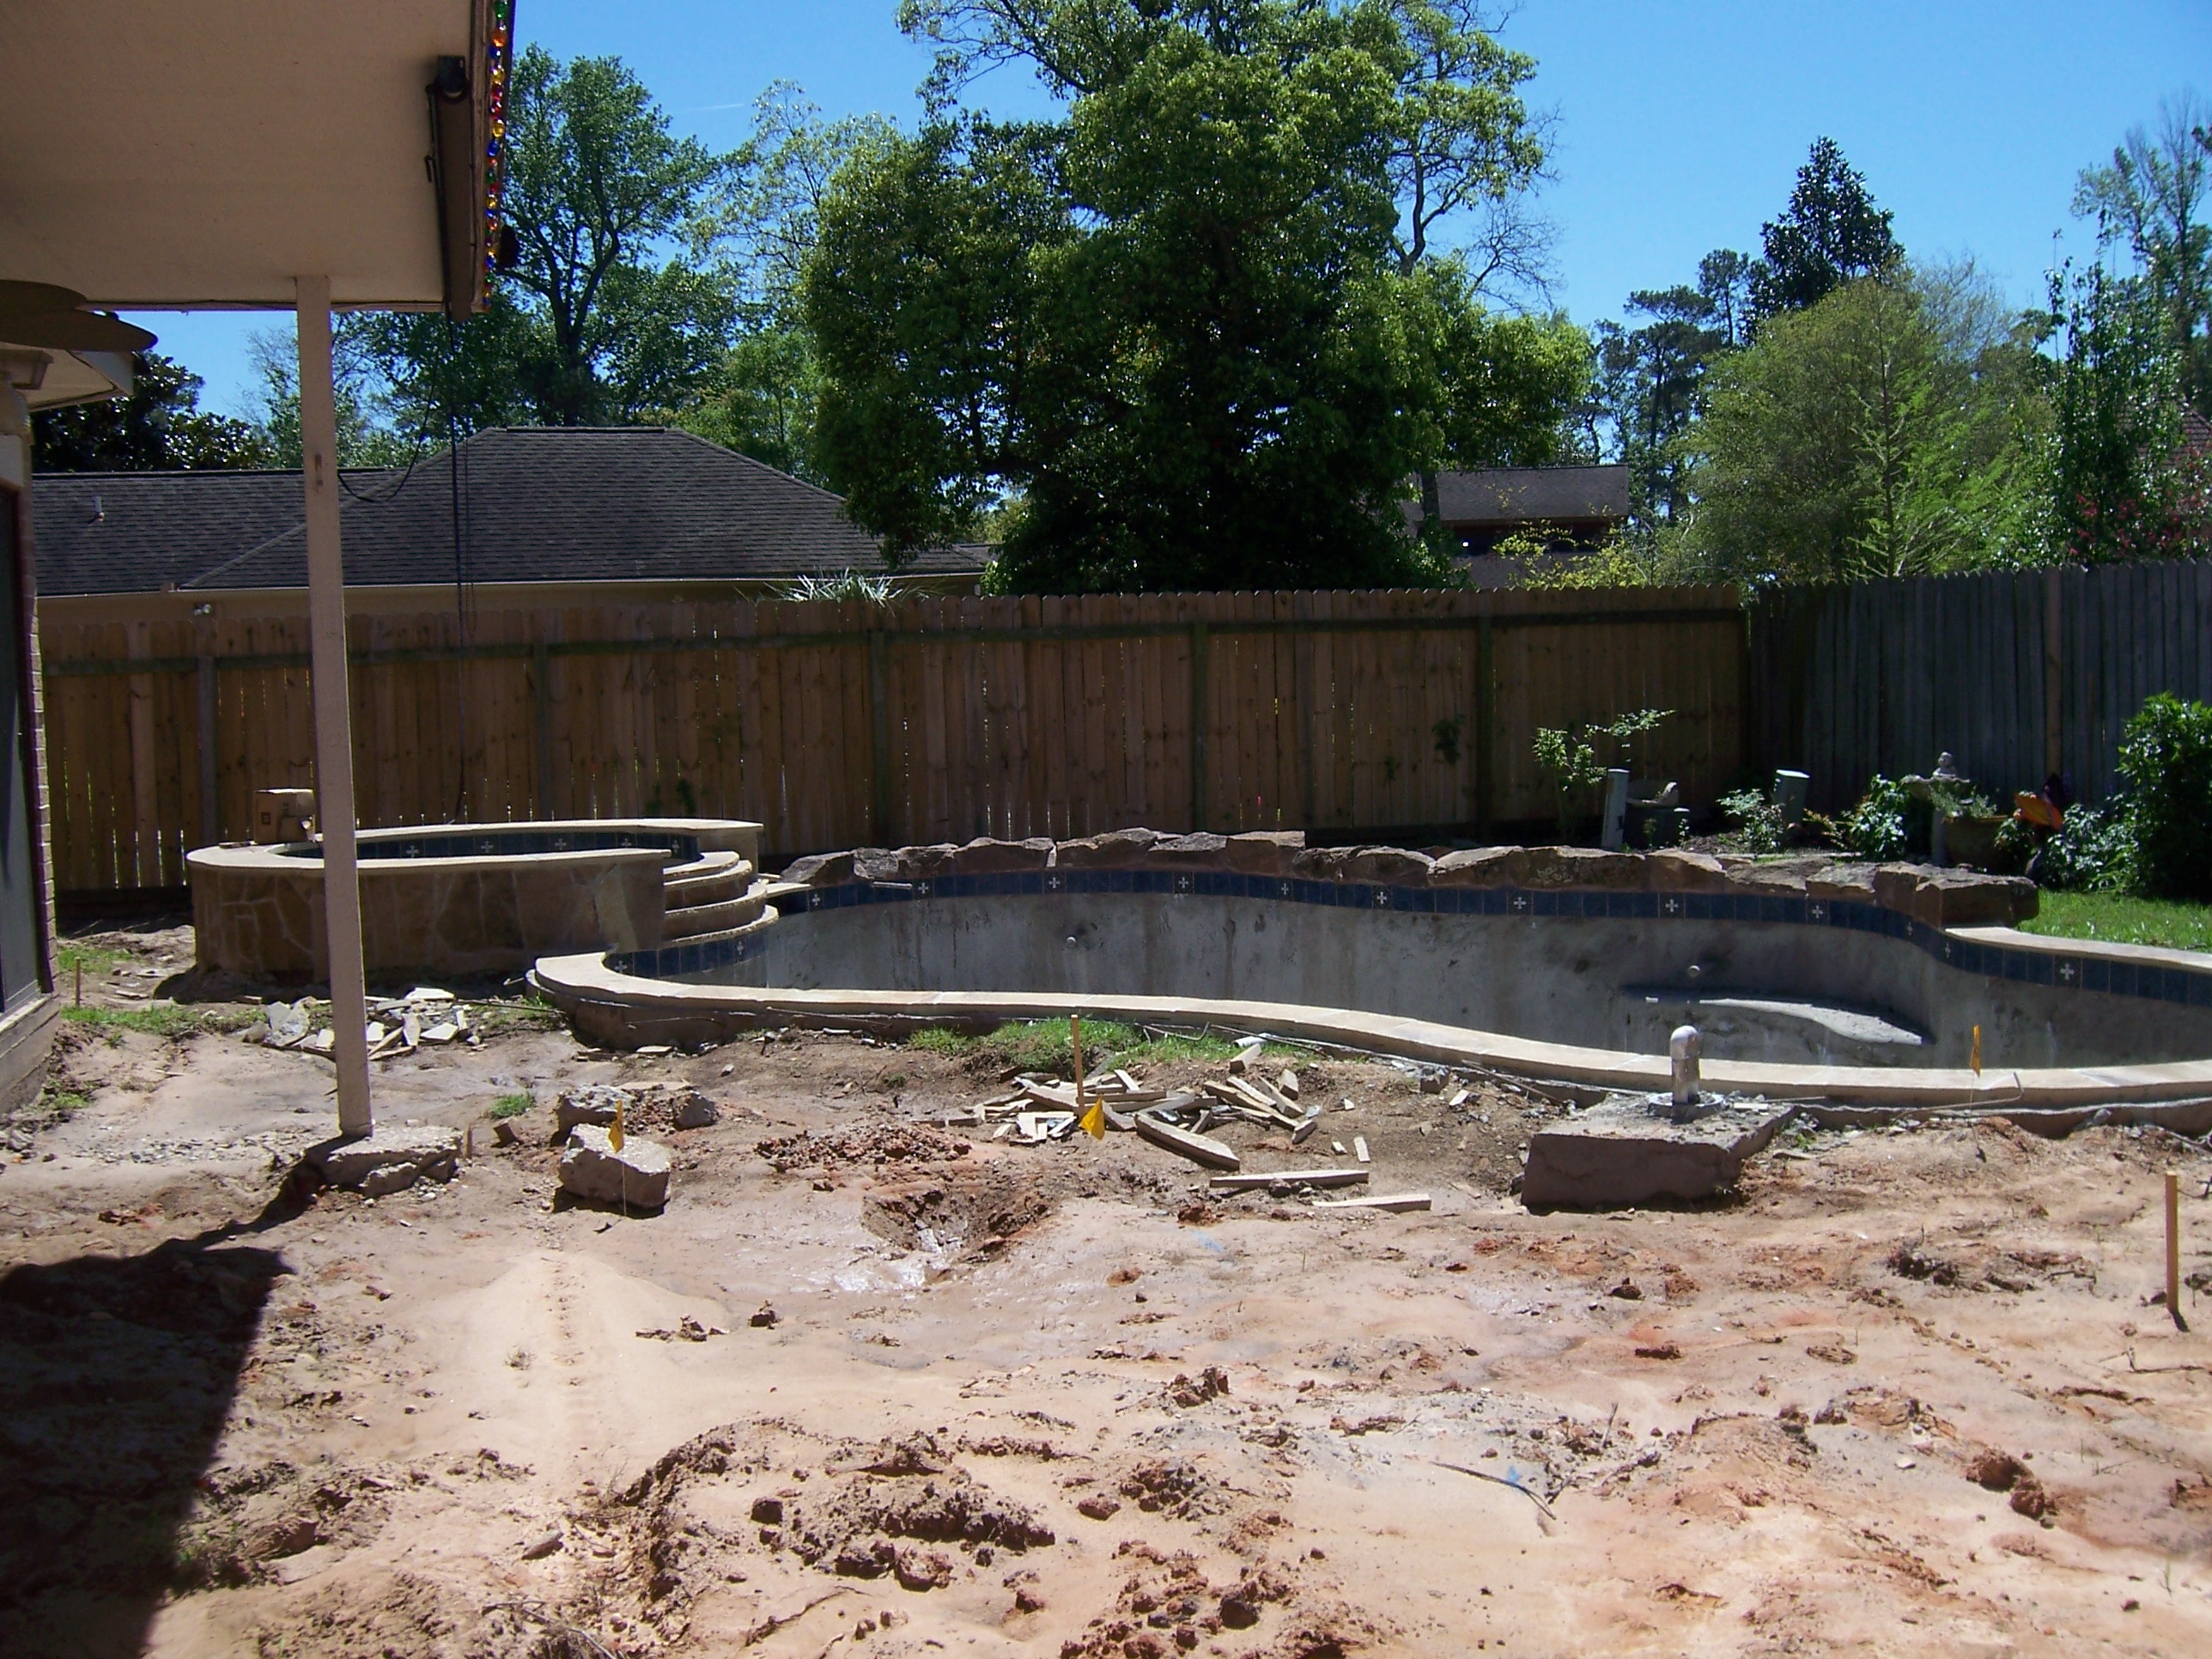 as of today this is what our yard and pool looks like